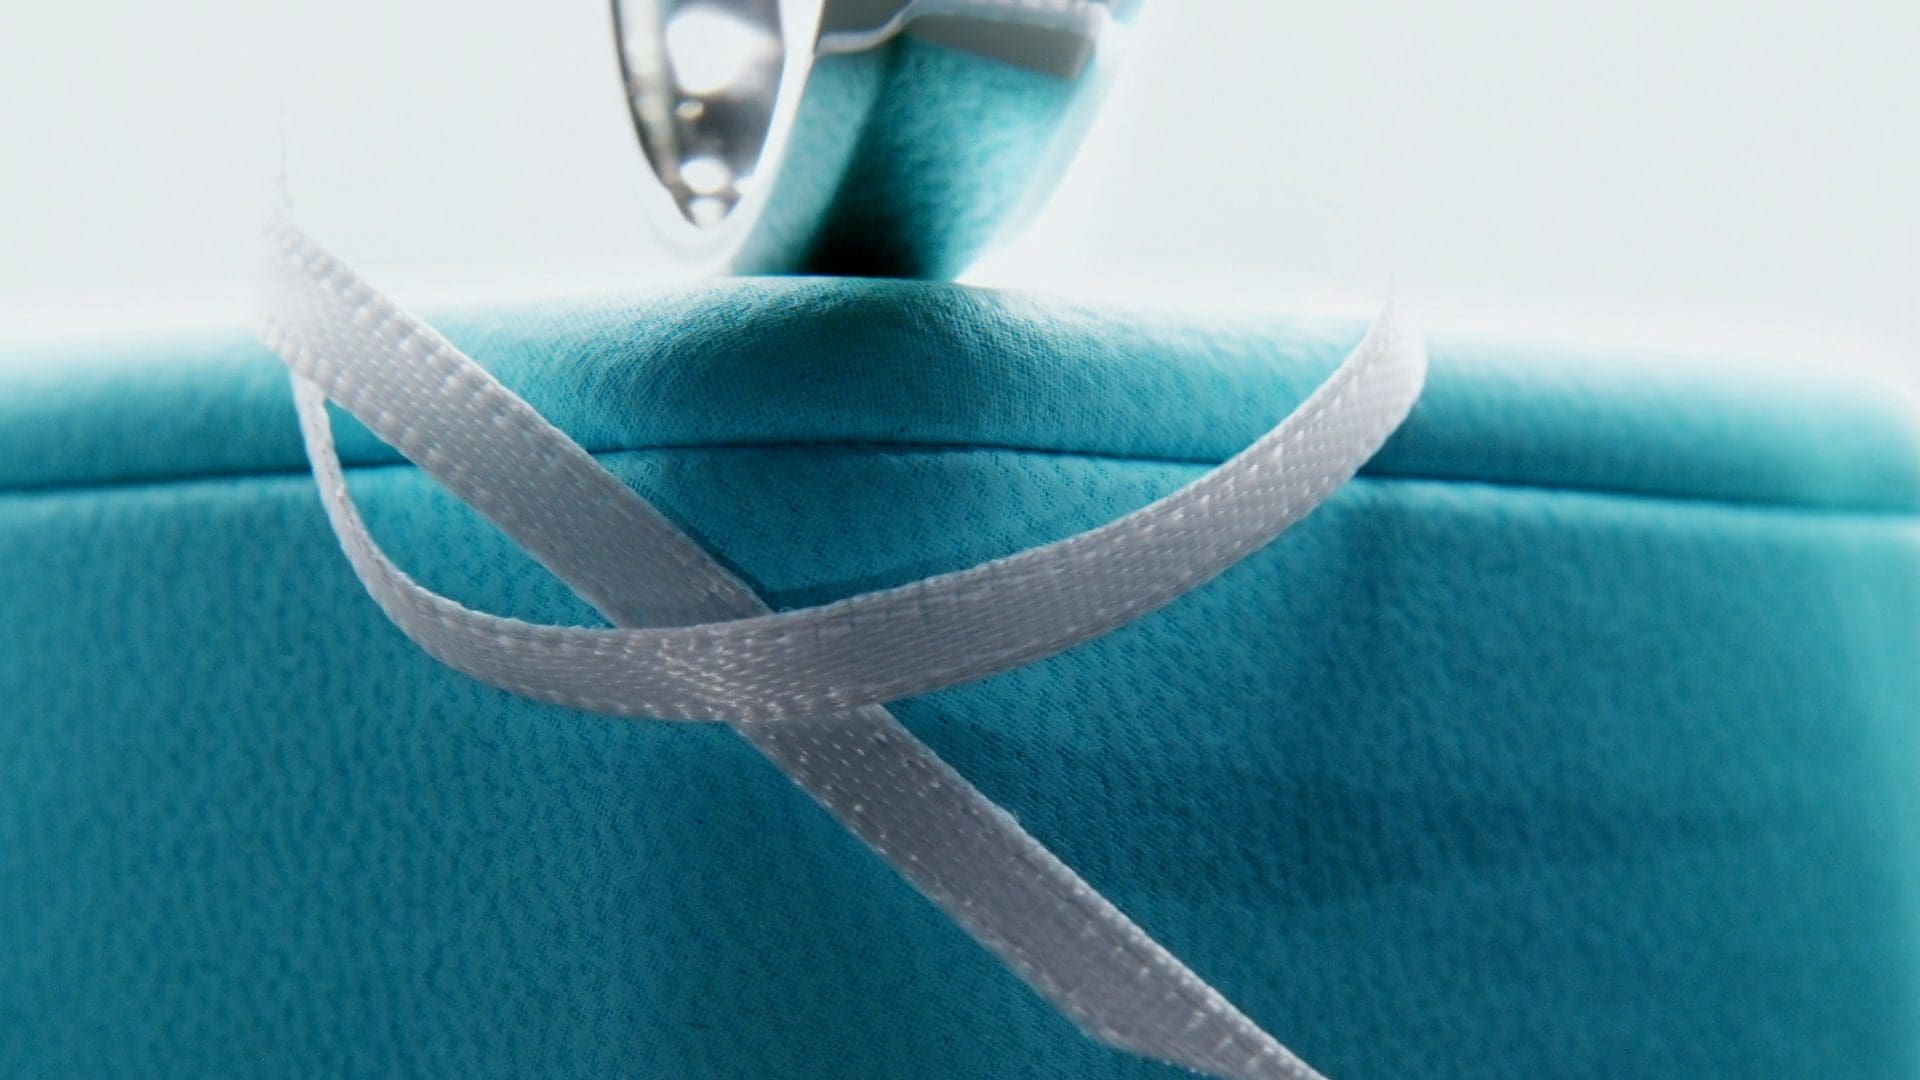 Close-up of the iconic Tiffany blue box with a white satin ribbon, symbolizing luxury and the timeless elegance of Tiffany & Co.'s fine jewelry.